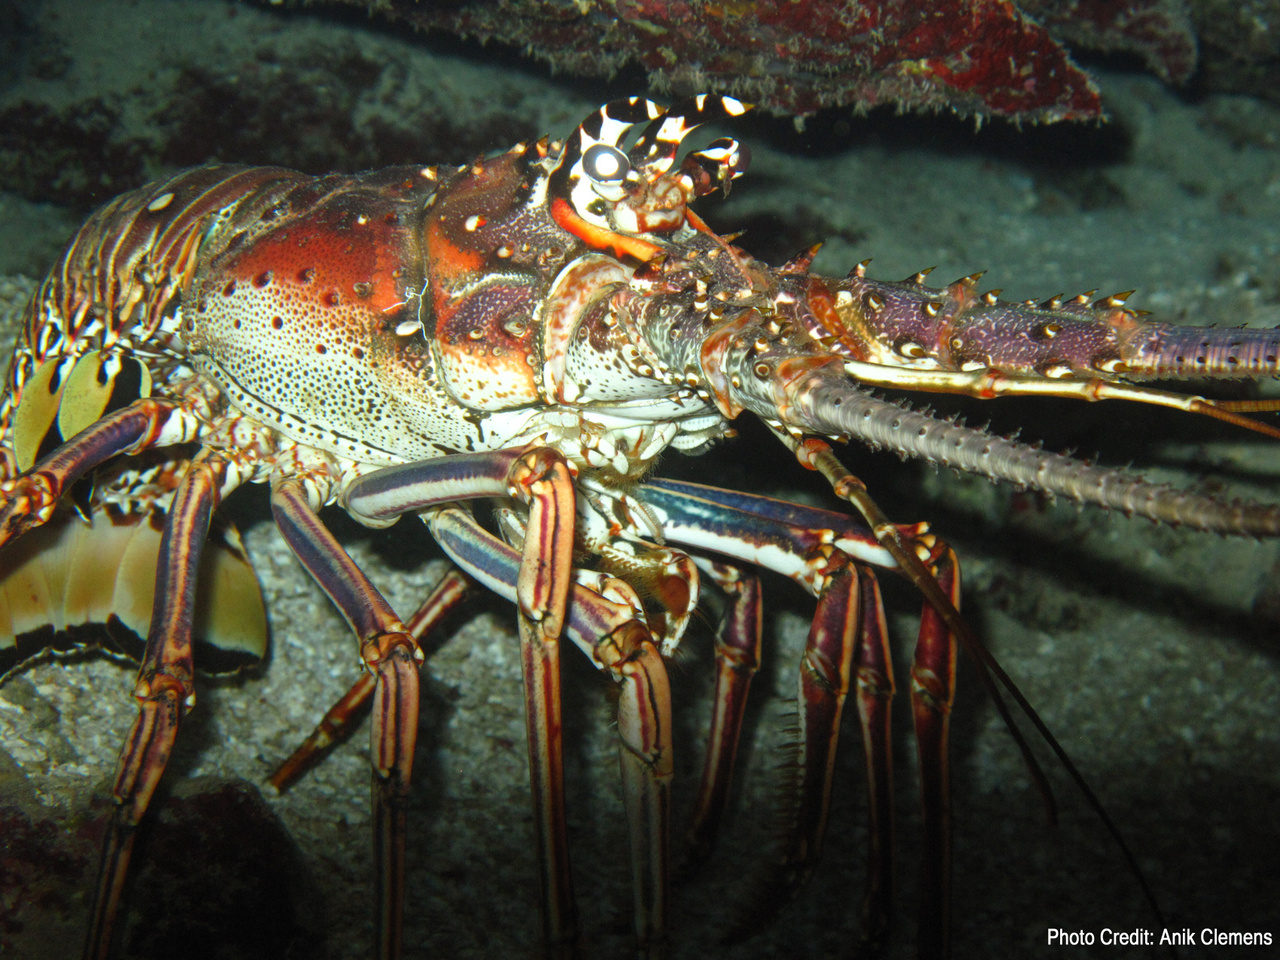 Gulf of Mexico and South Atlantic Spiny Lobster Fishery Management Plan